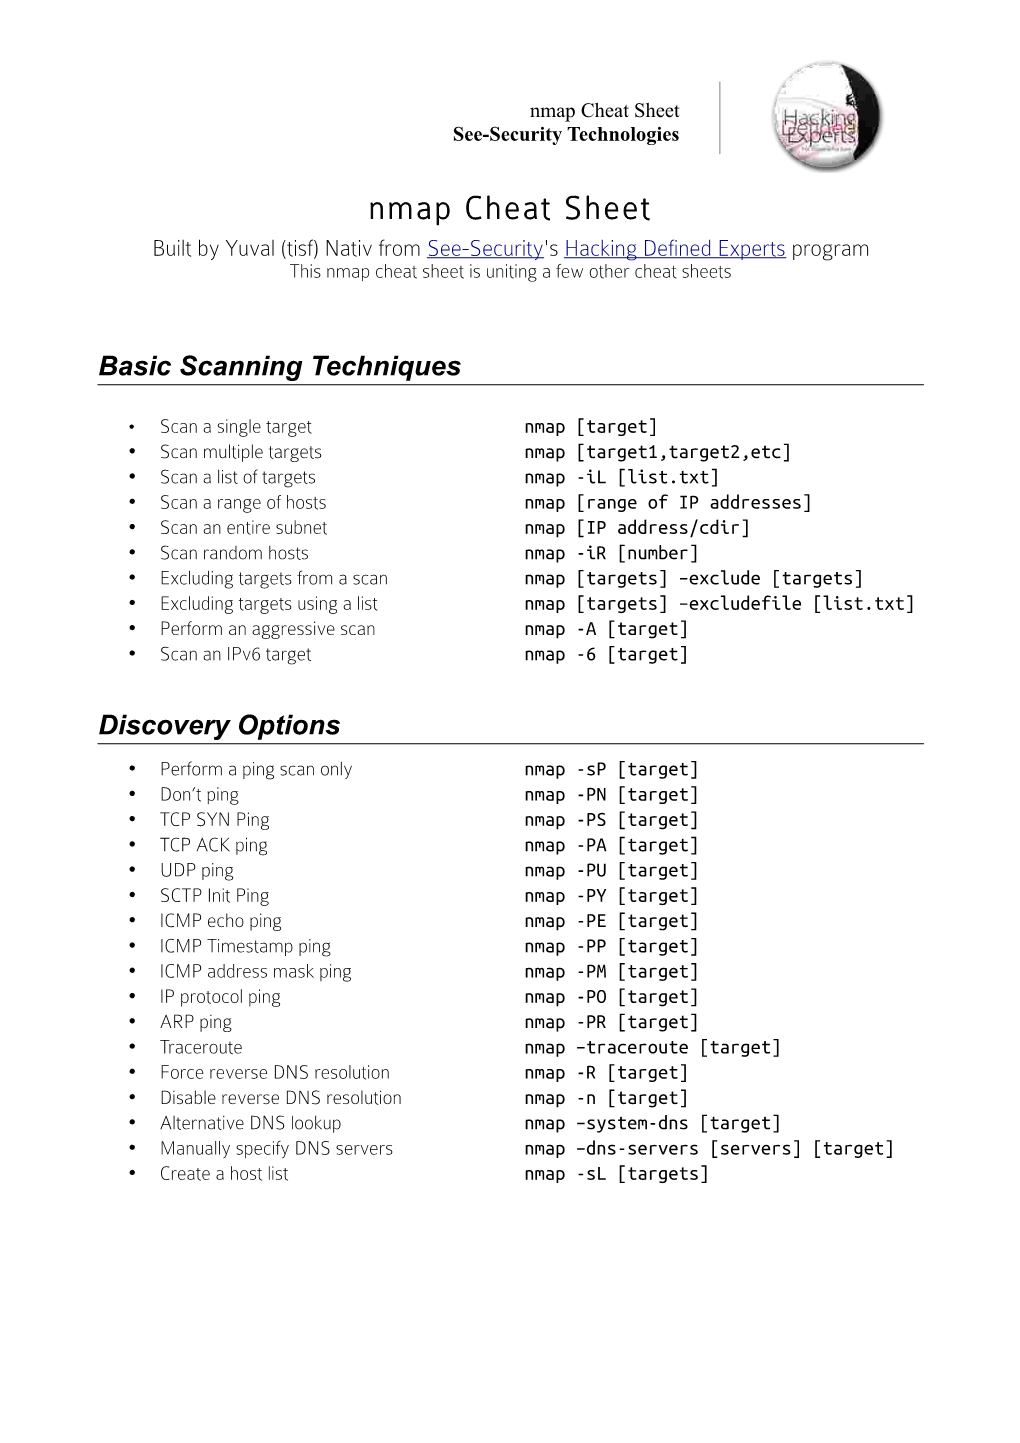 Nmap Cheat Sheet See-Security Technologies